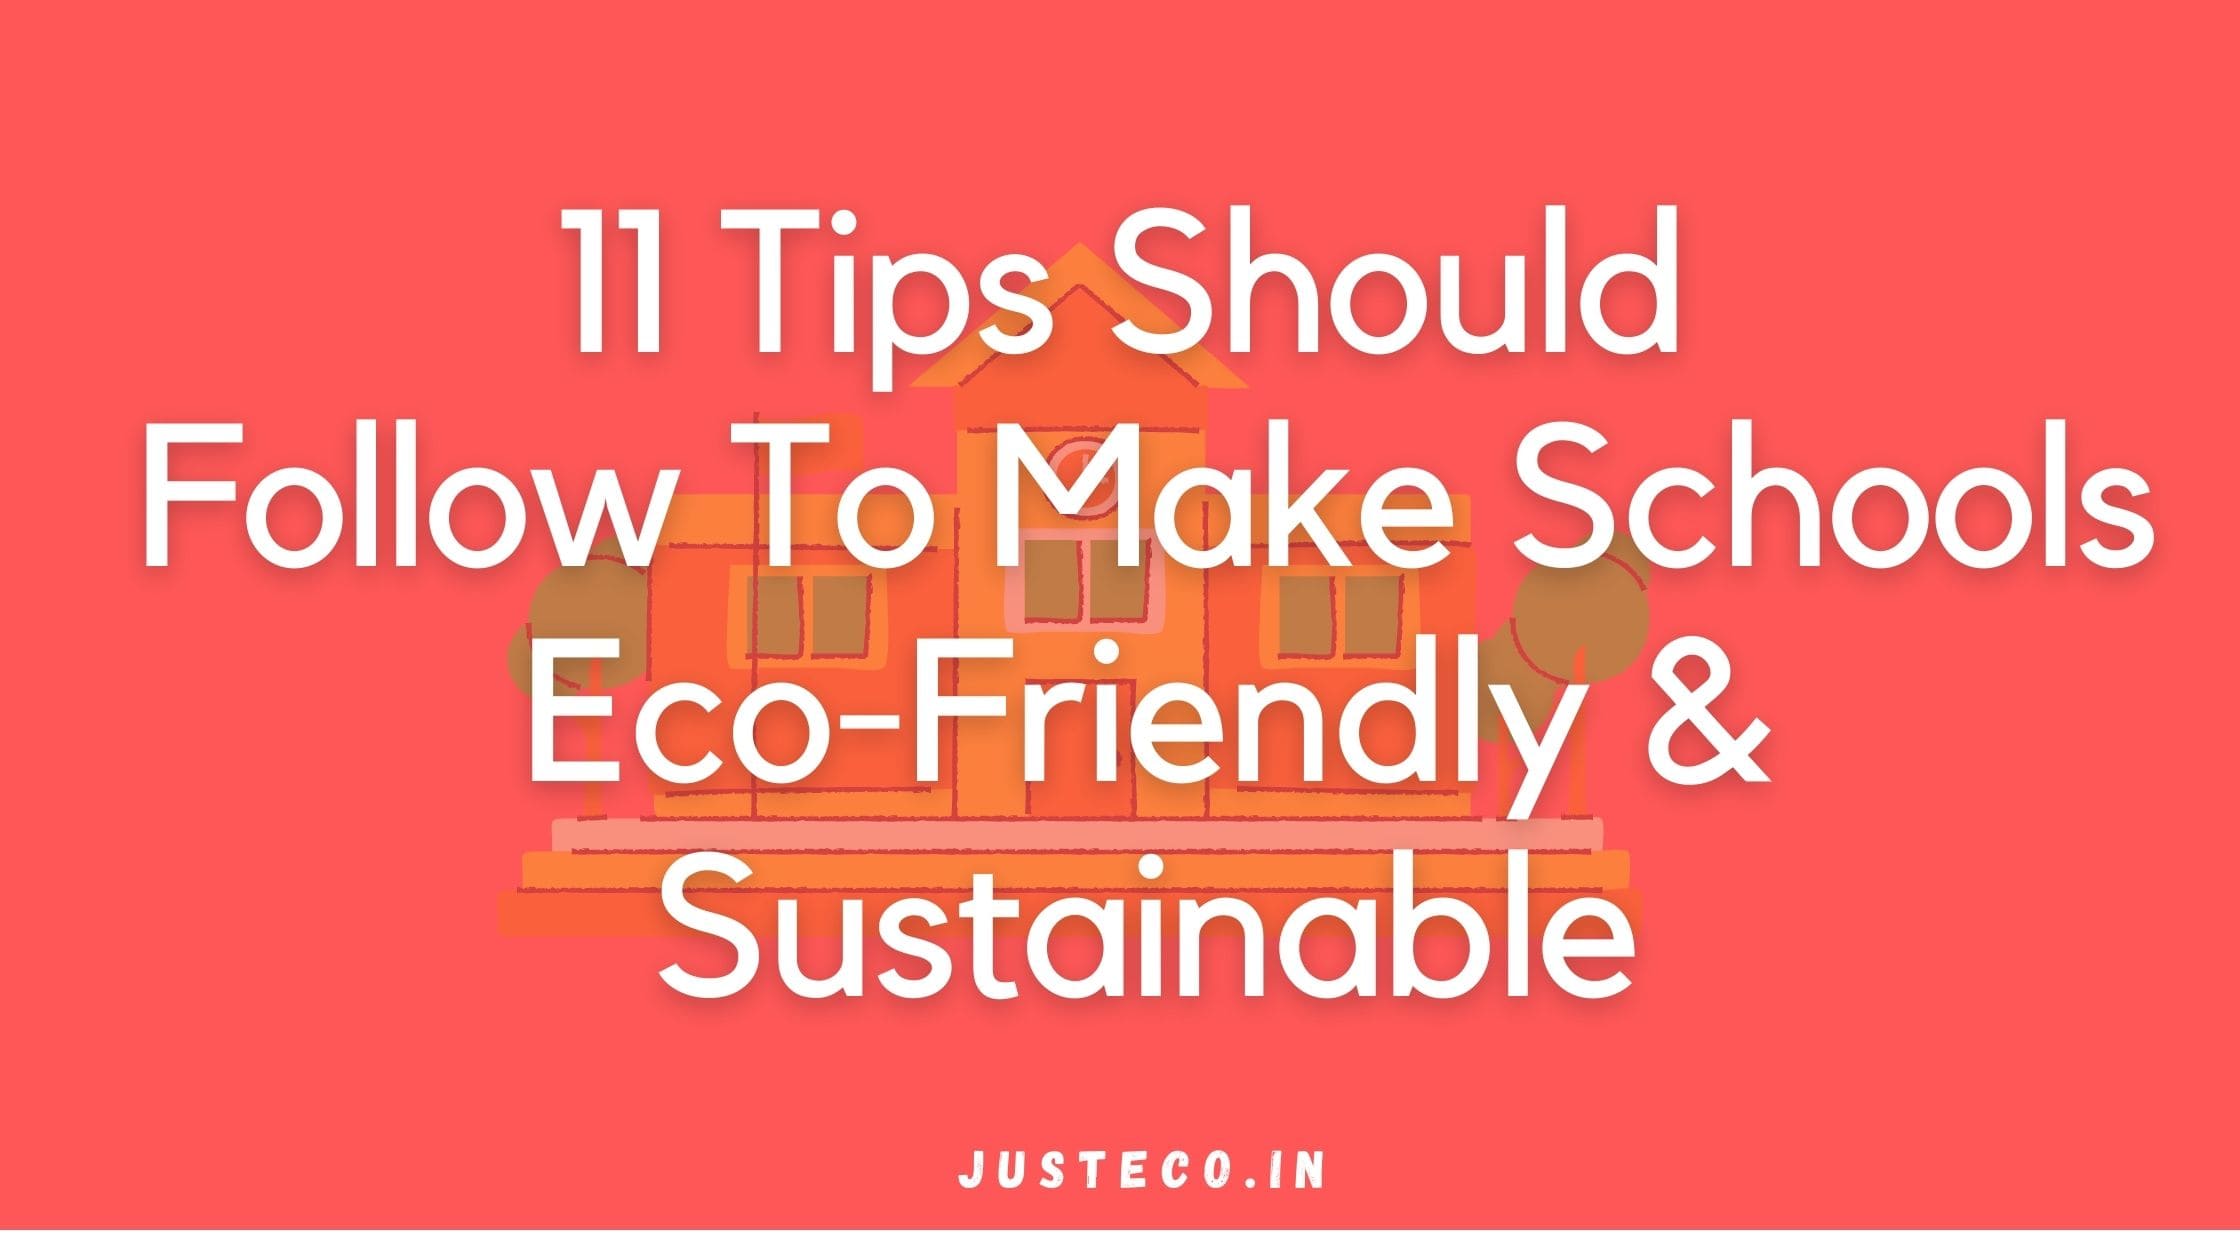 11 Tips Should Follow To Make Schools Eco-Friendly & Sustainable